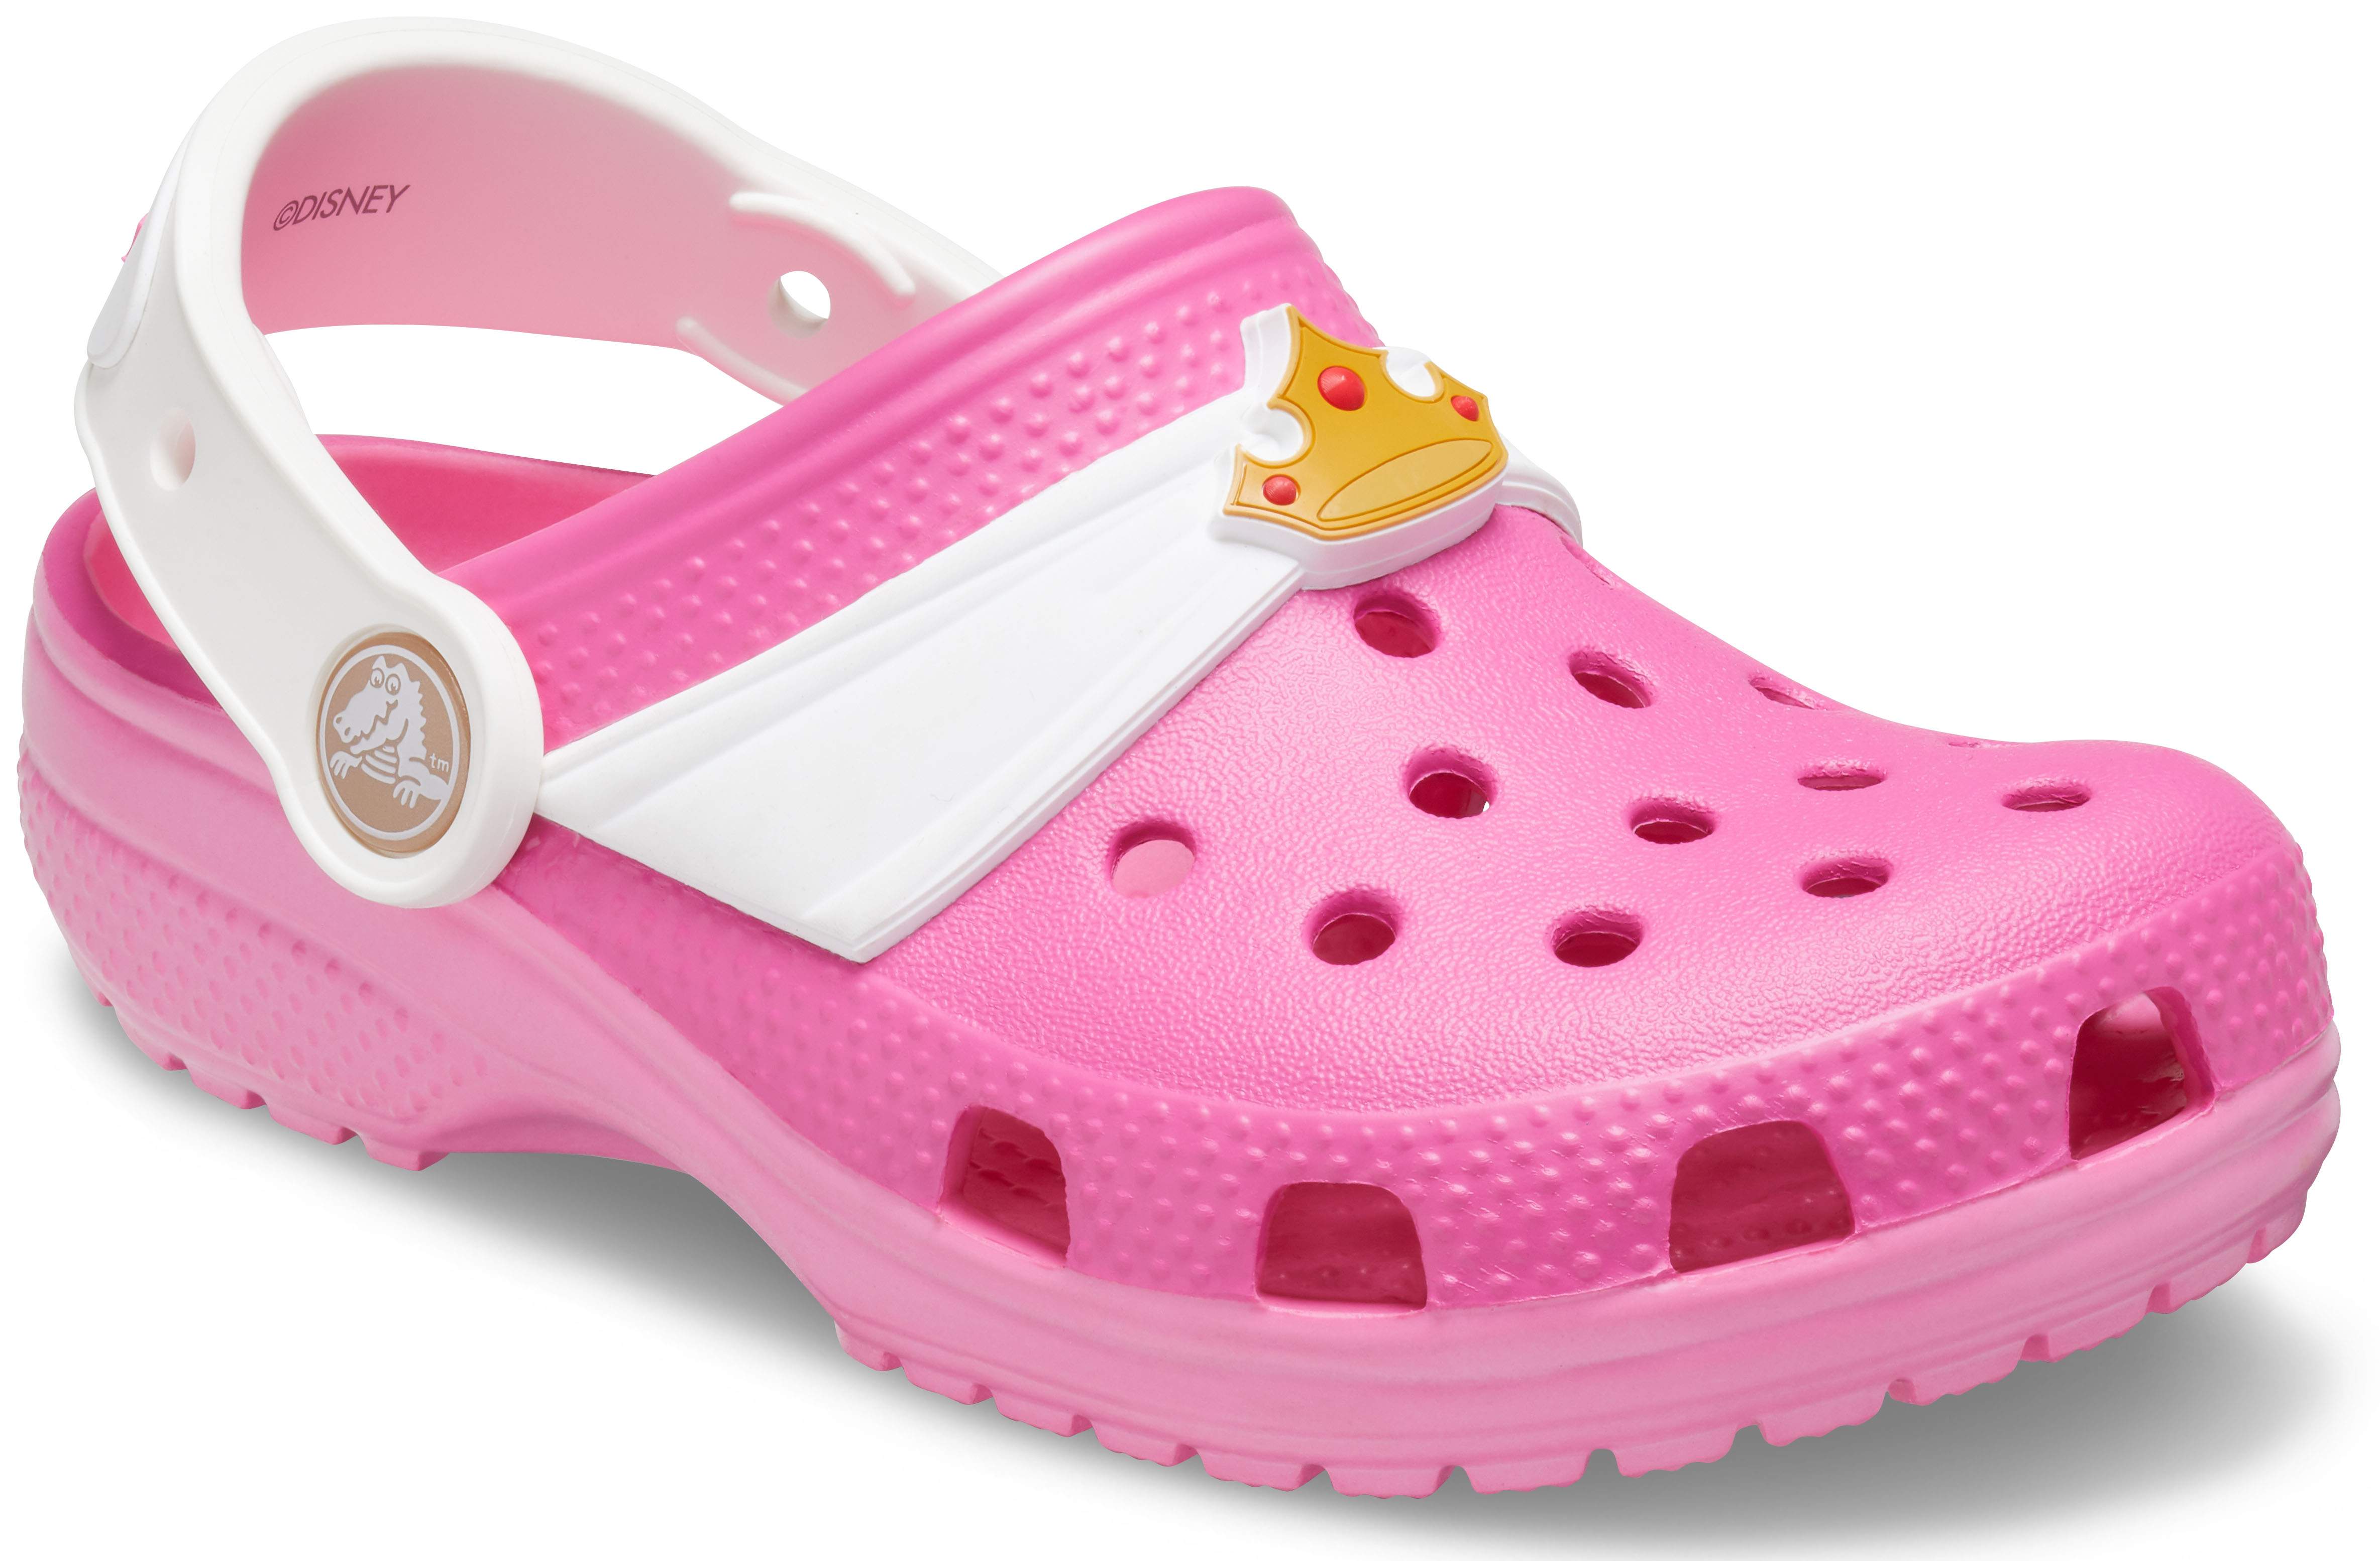 crocs water shoes for toddlers